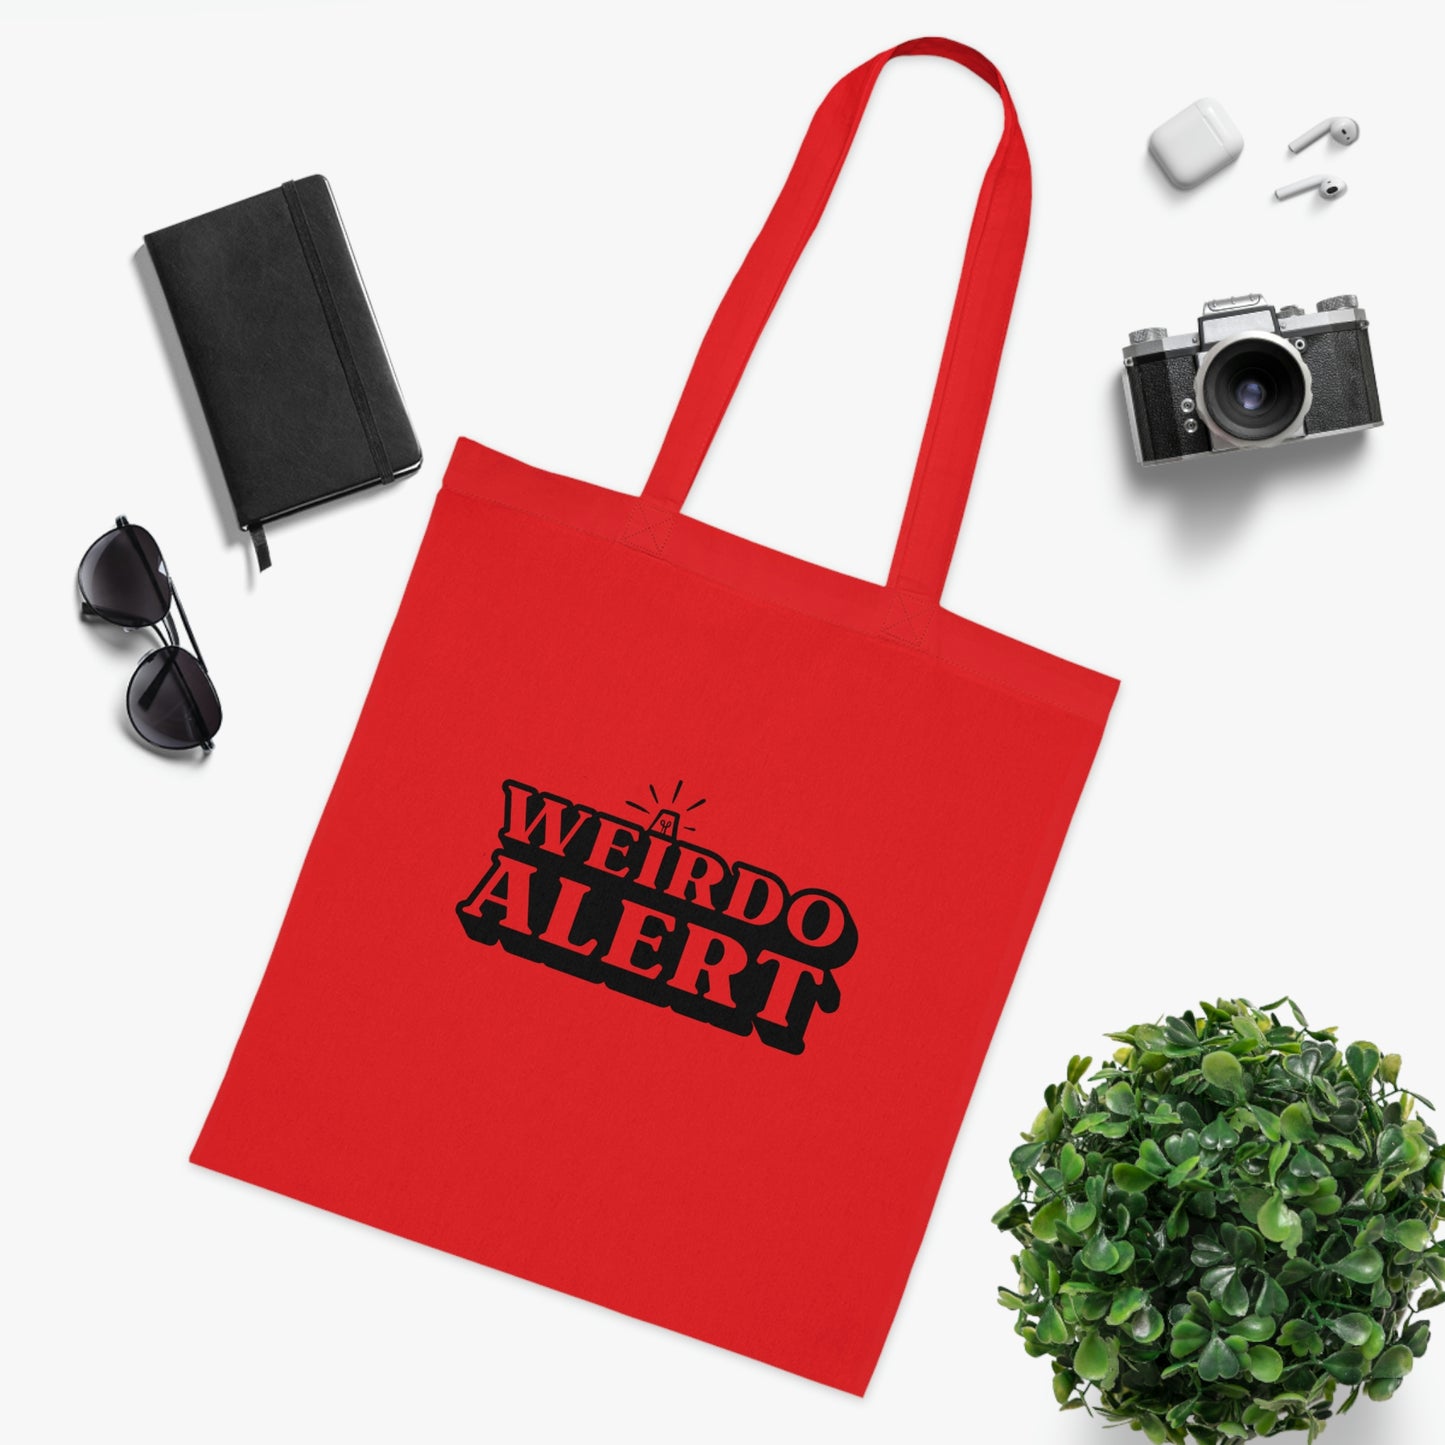 Weirdo | Red cotton tote bag with huge warning printed at the front: WEIRDO ALERT. Check out more weird tote bags in our online giftstore for weirdos.